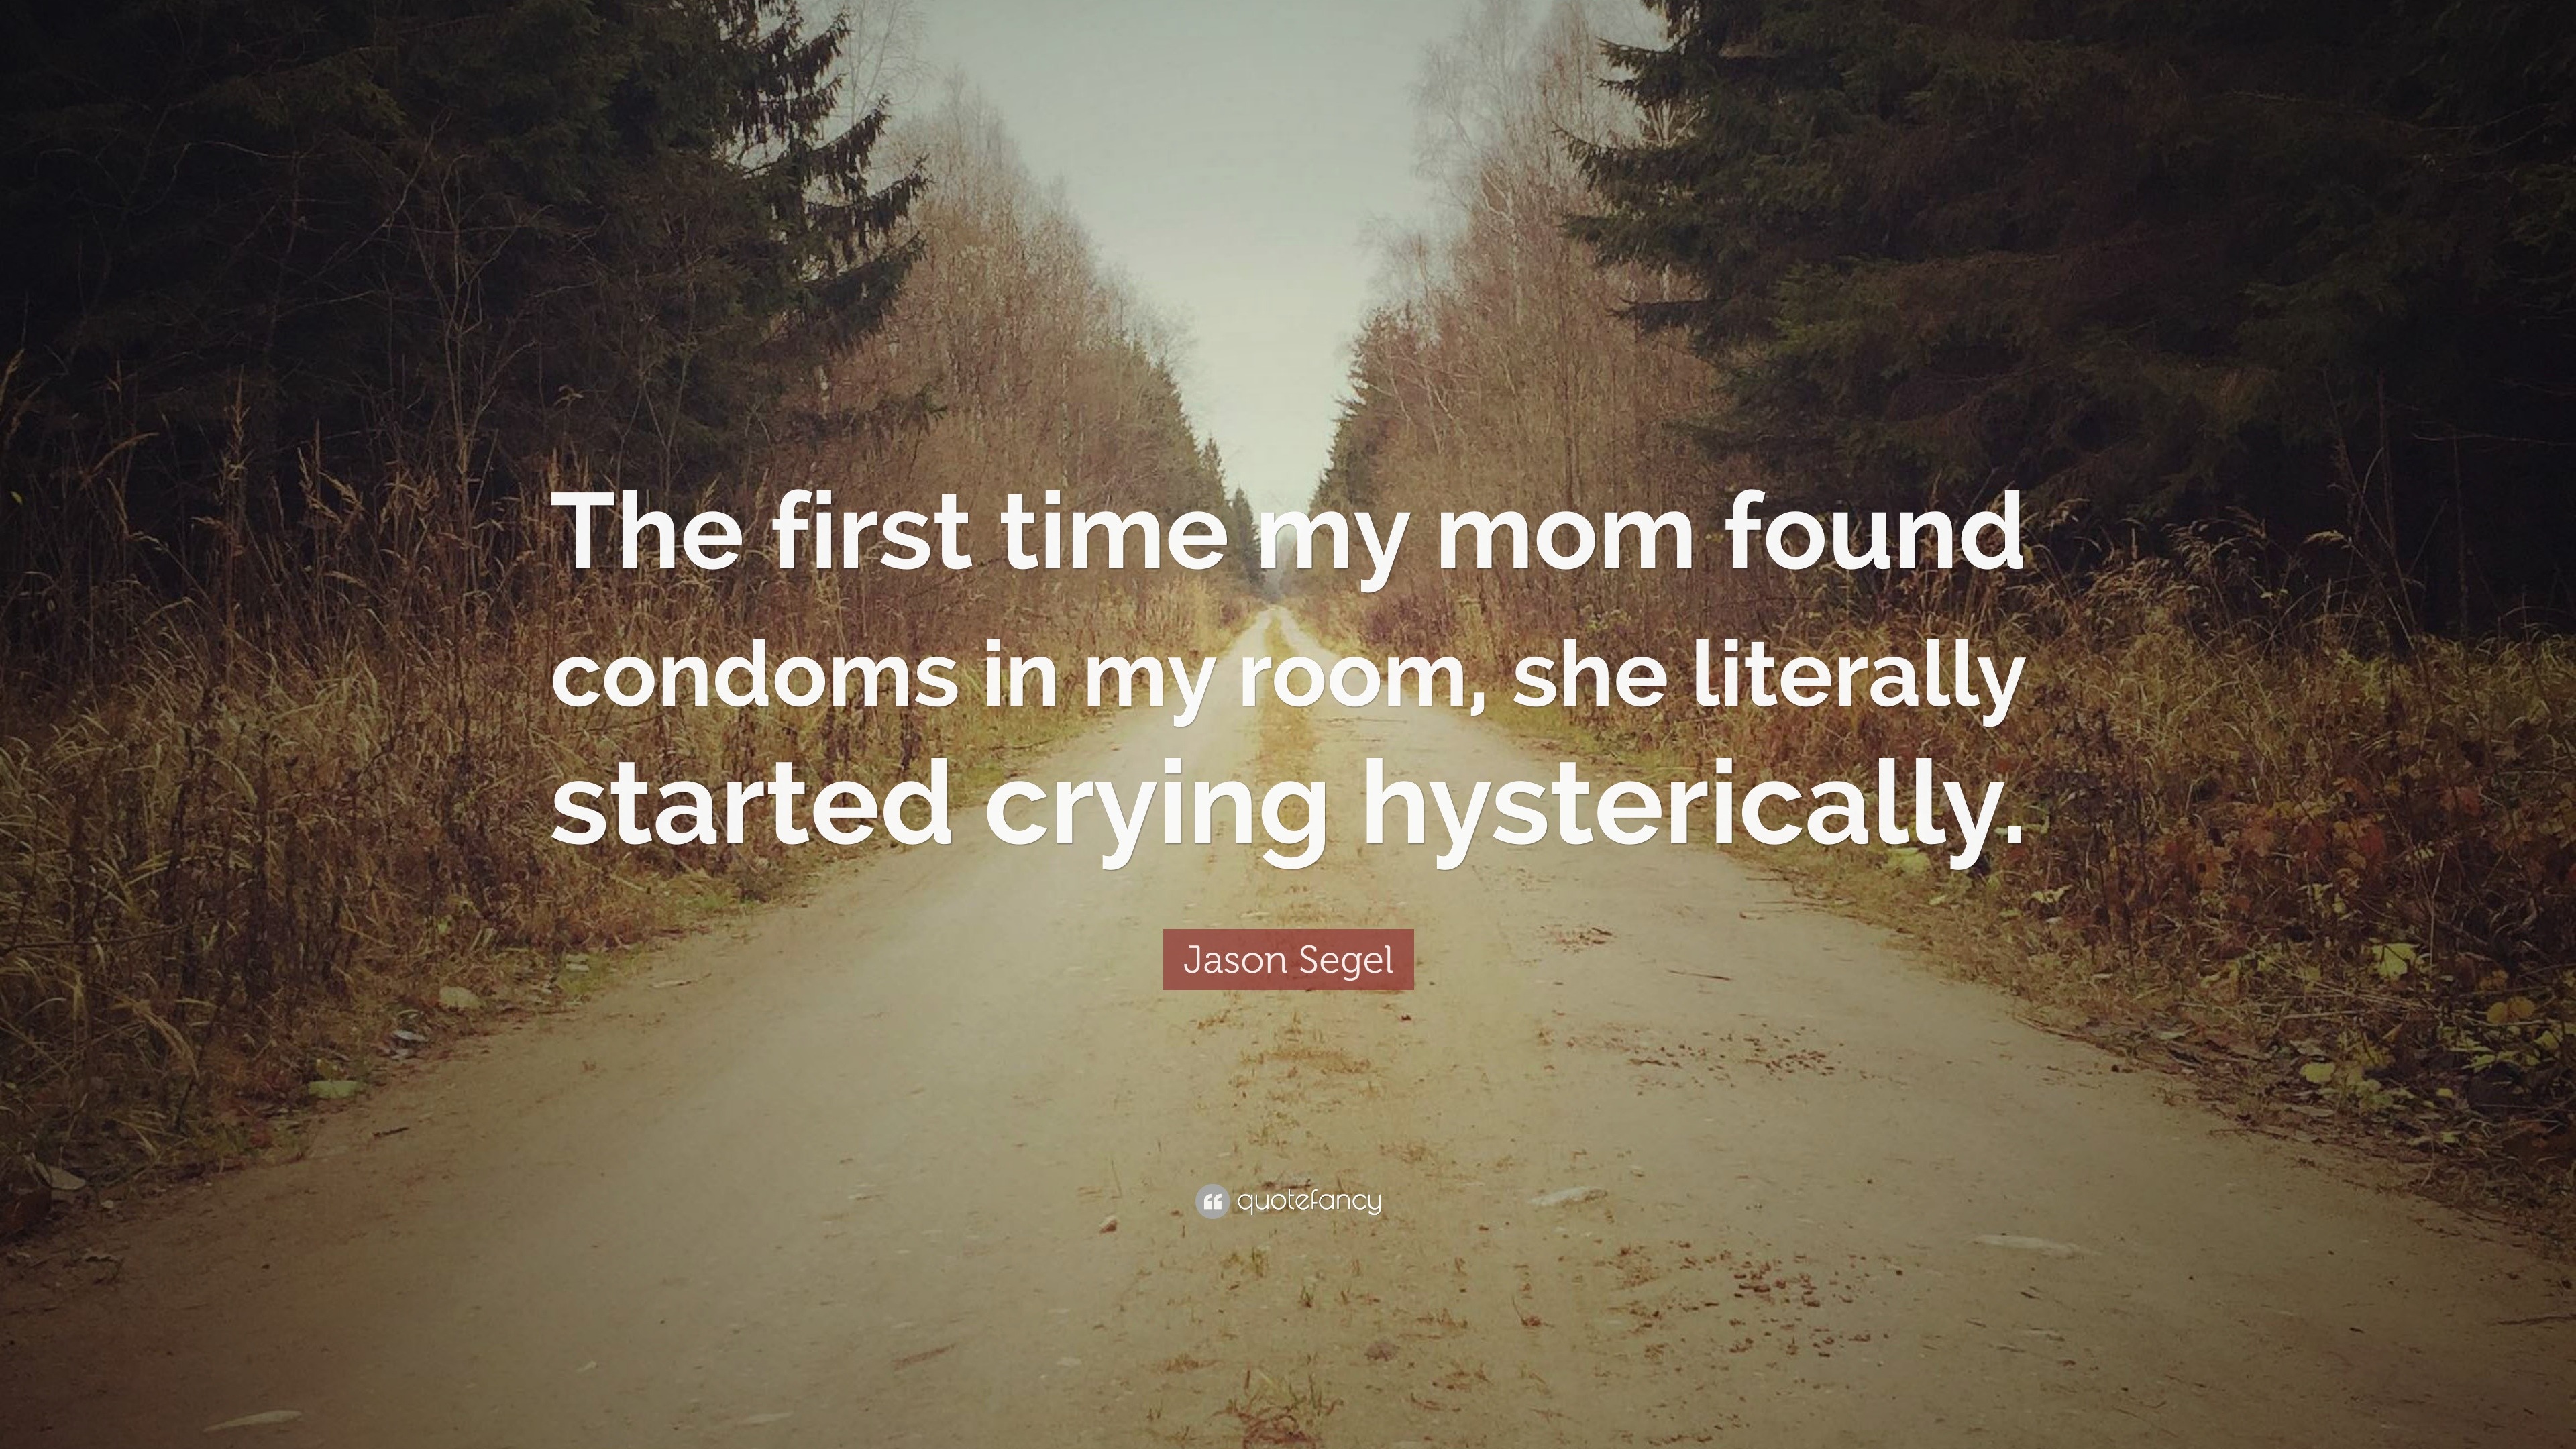 Jason Segel Quote “the First Time My Mom Found Condoms In My Room She Literally Started Crying